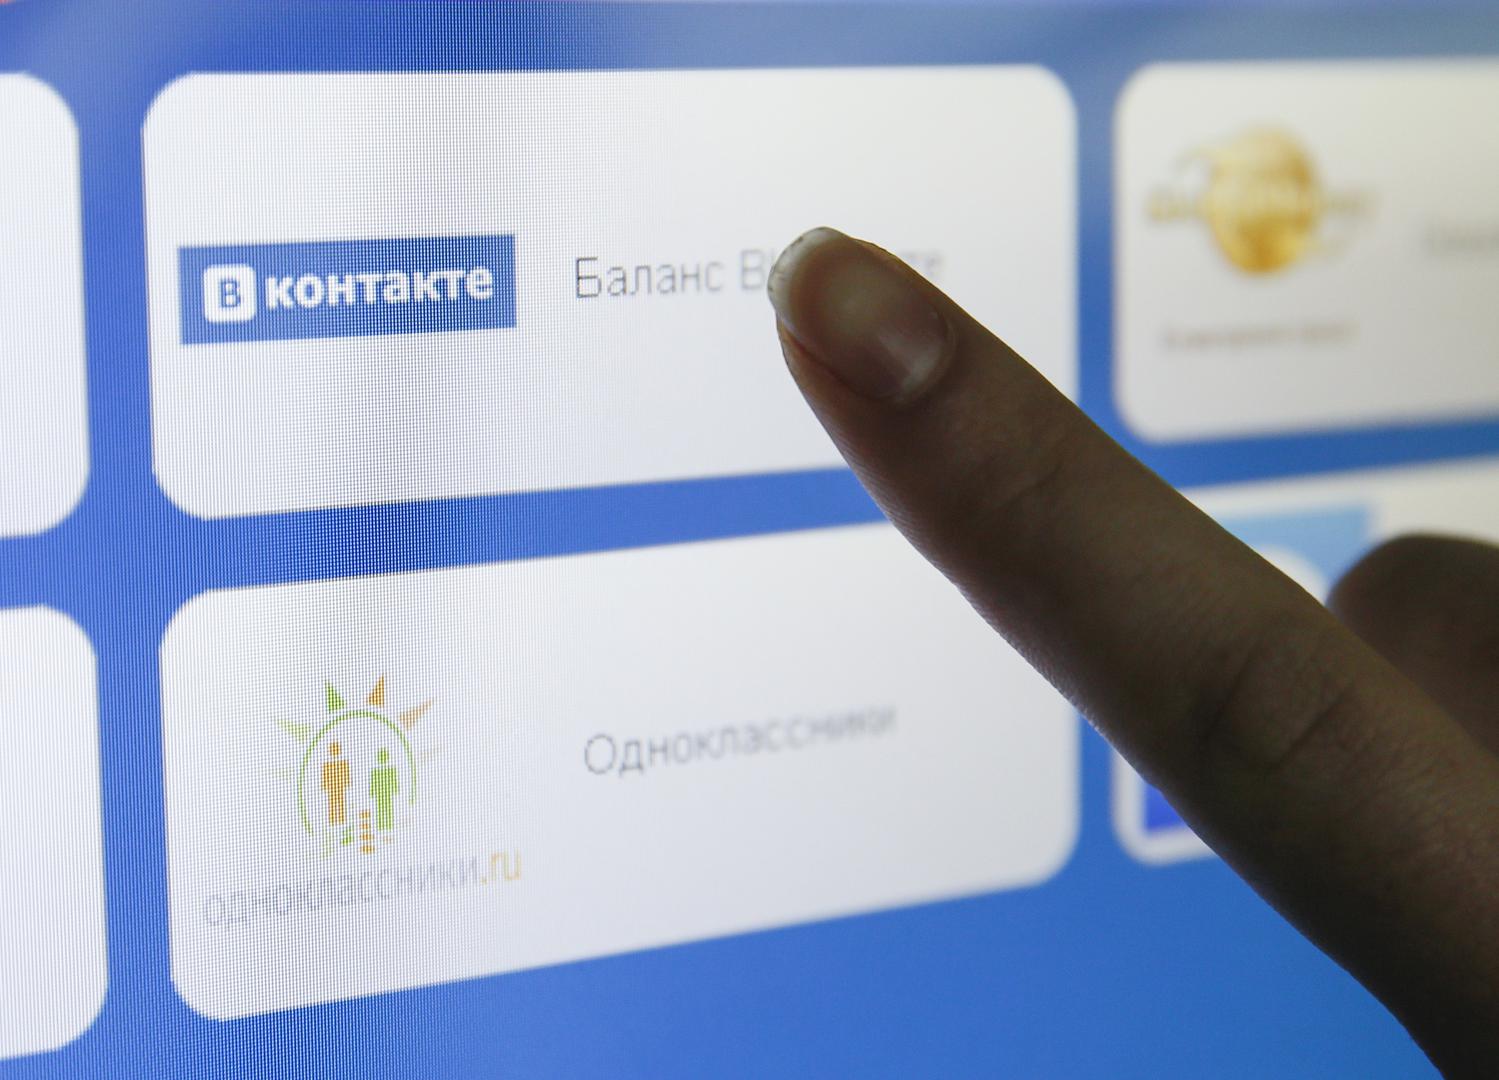 Logos of Vkontakte and Odnoklassniki social networks are seen on the screen of a payment terminal in this picture illustration taken May 16, 2017.